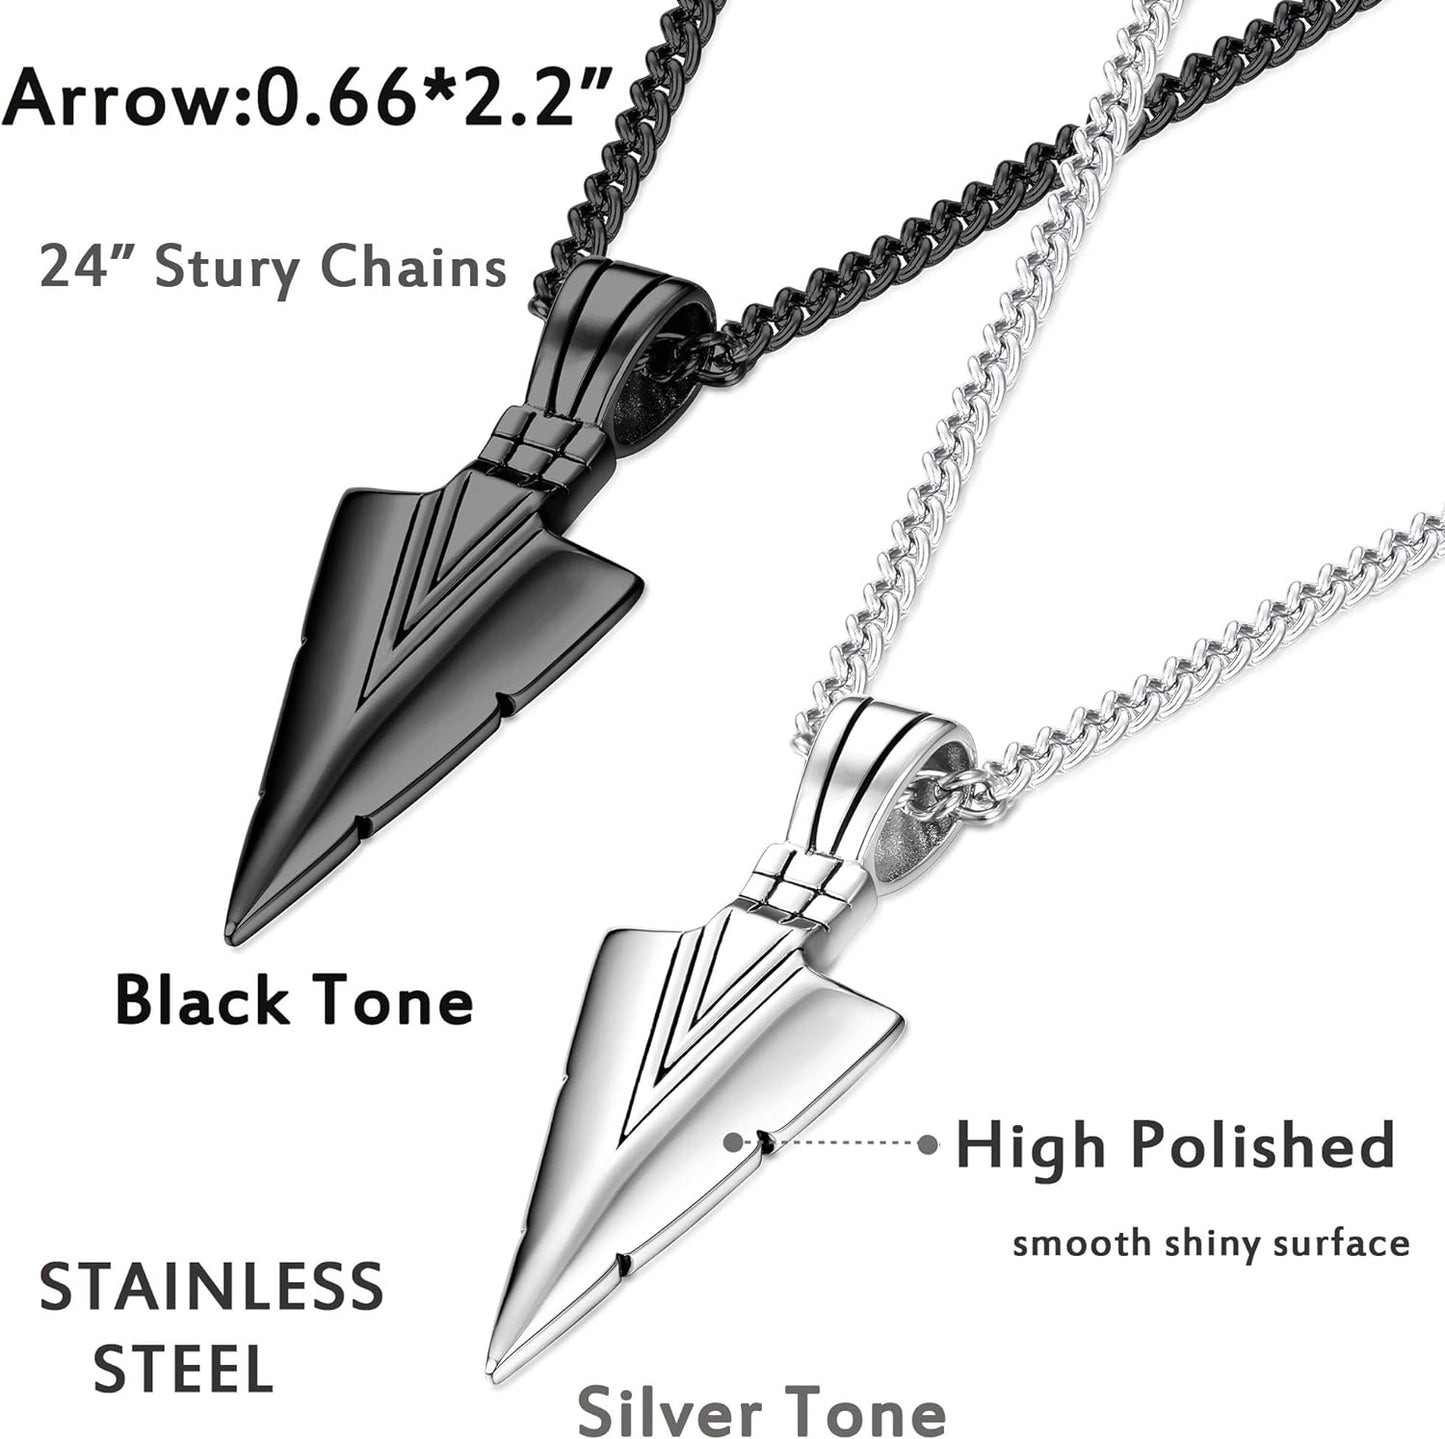 Jstyle Stainless Steel Pendant Necklace for Mens Boys Cool Spearpoint Arrowhead Pendant Chain Necklace Set